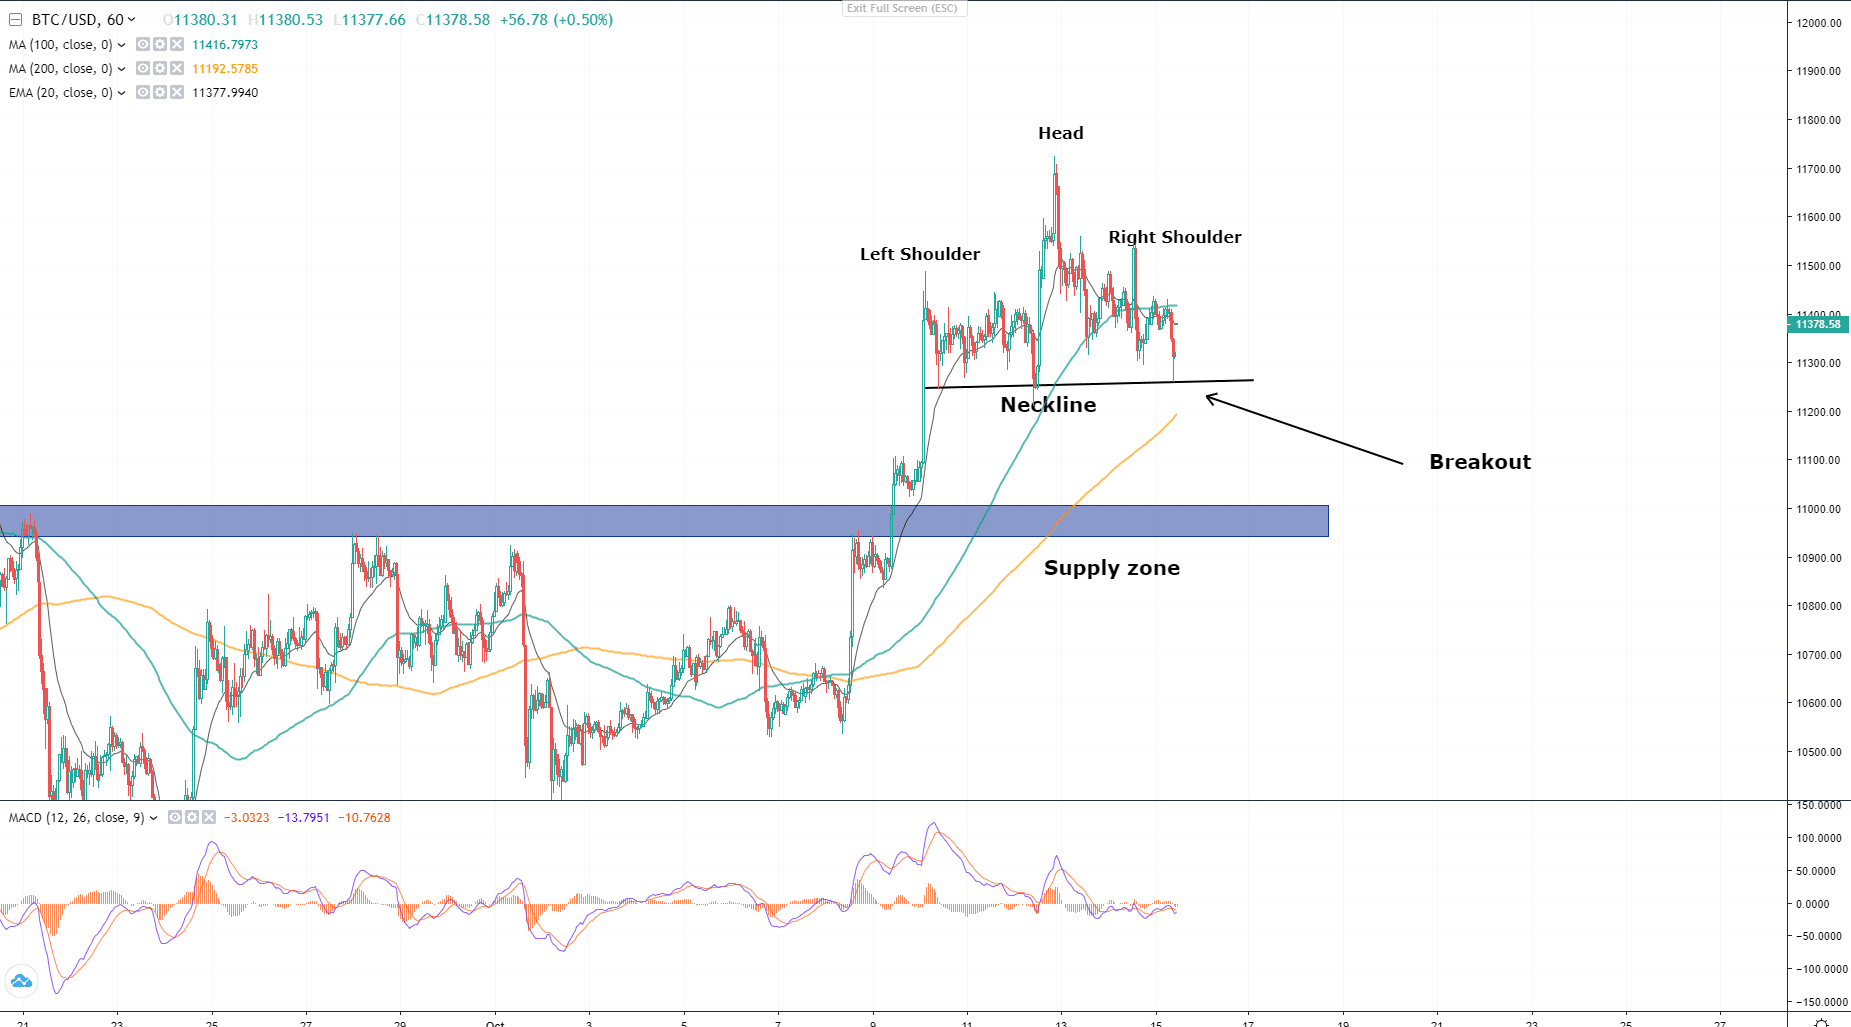 Bitcoin: Decisive Levels and Patterns to Watch